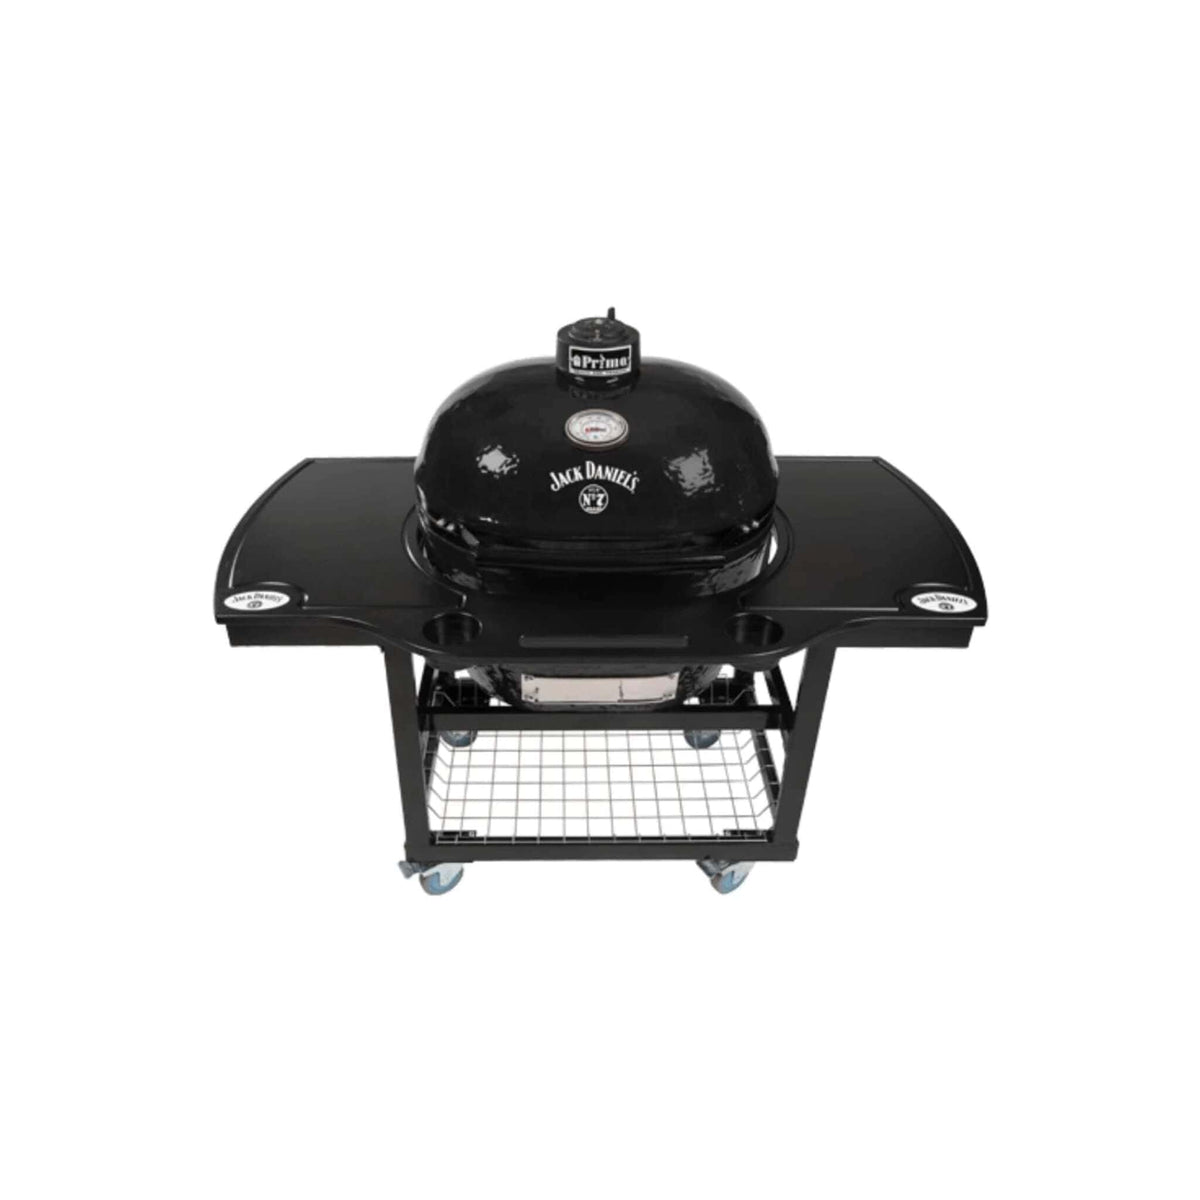 Primo X-Large 400 Oval Ceramic Kamado Grill with Stainless Steel Grates - Jack Daniel’s Edition - Culinary Hardware